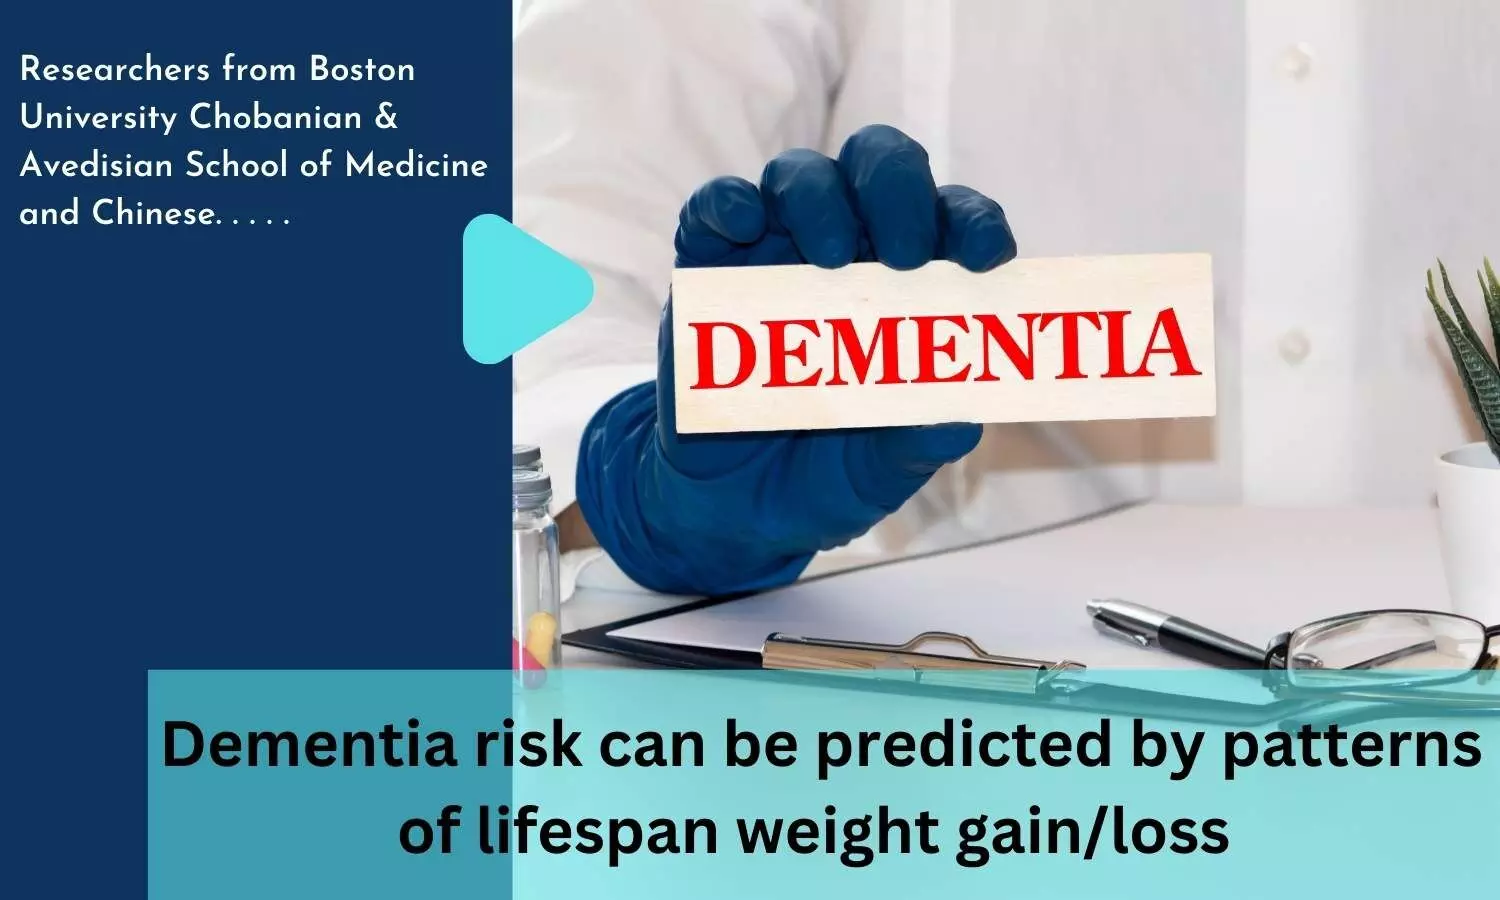 Dementia risk can be predicted by patterns of lifespan weight gain/loss